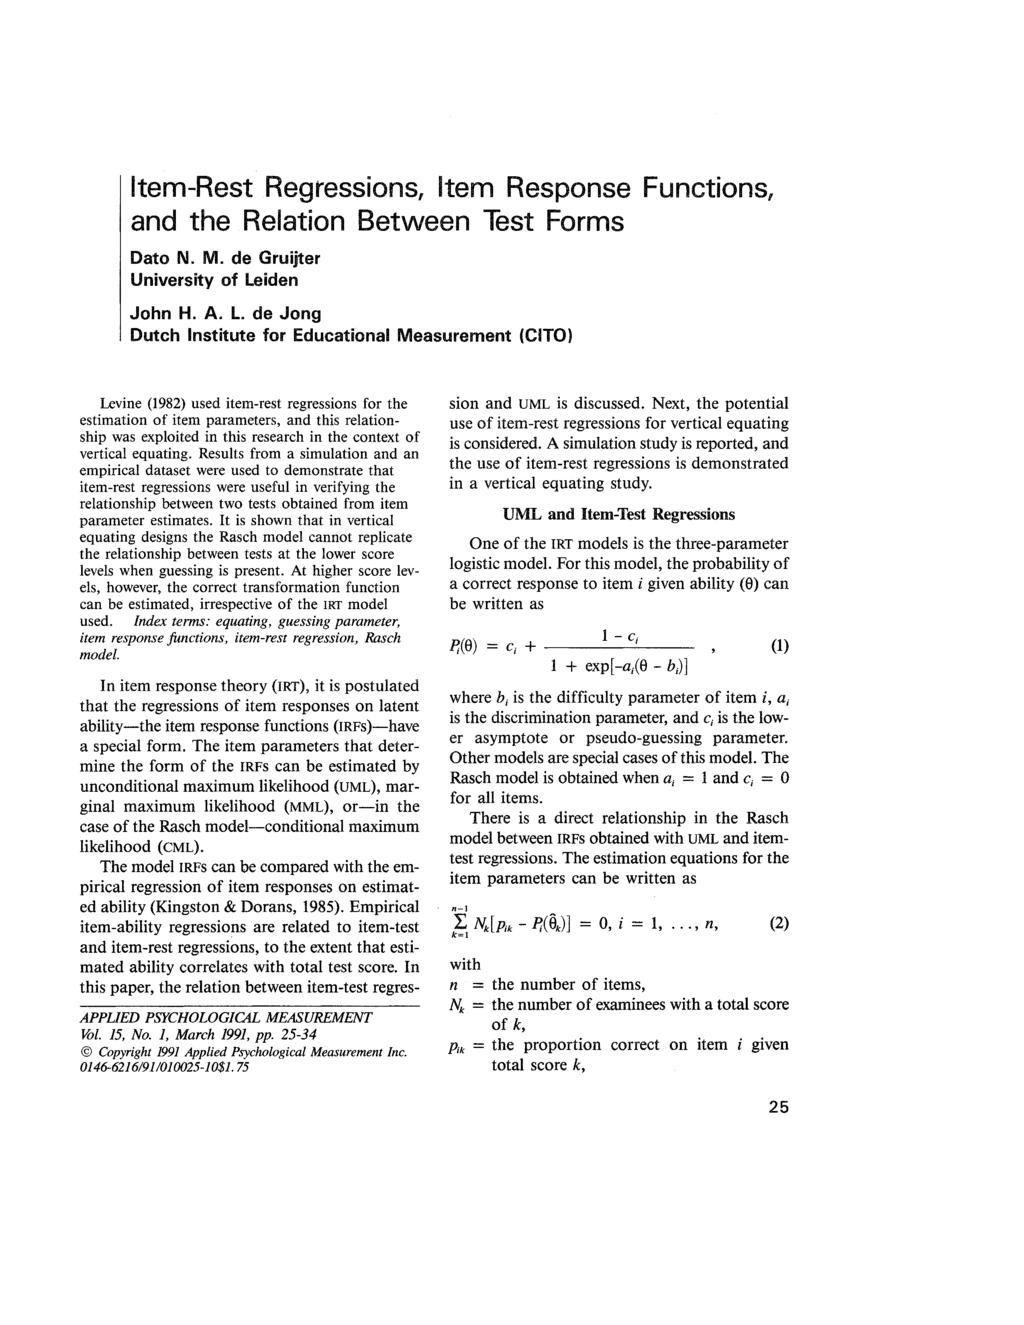 Item-Rest Regressions, Item Response Functions, and the Relation Between Test Forms Dato N. M. de Gruijter University of Le